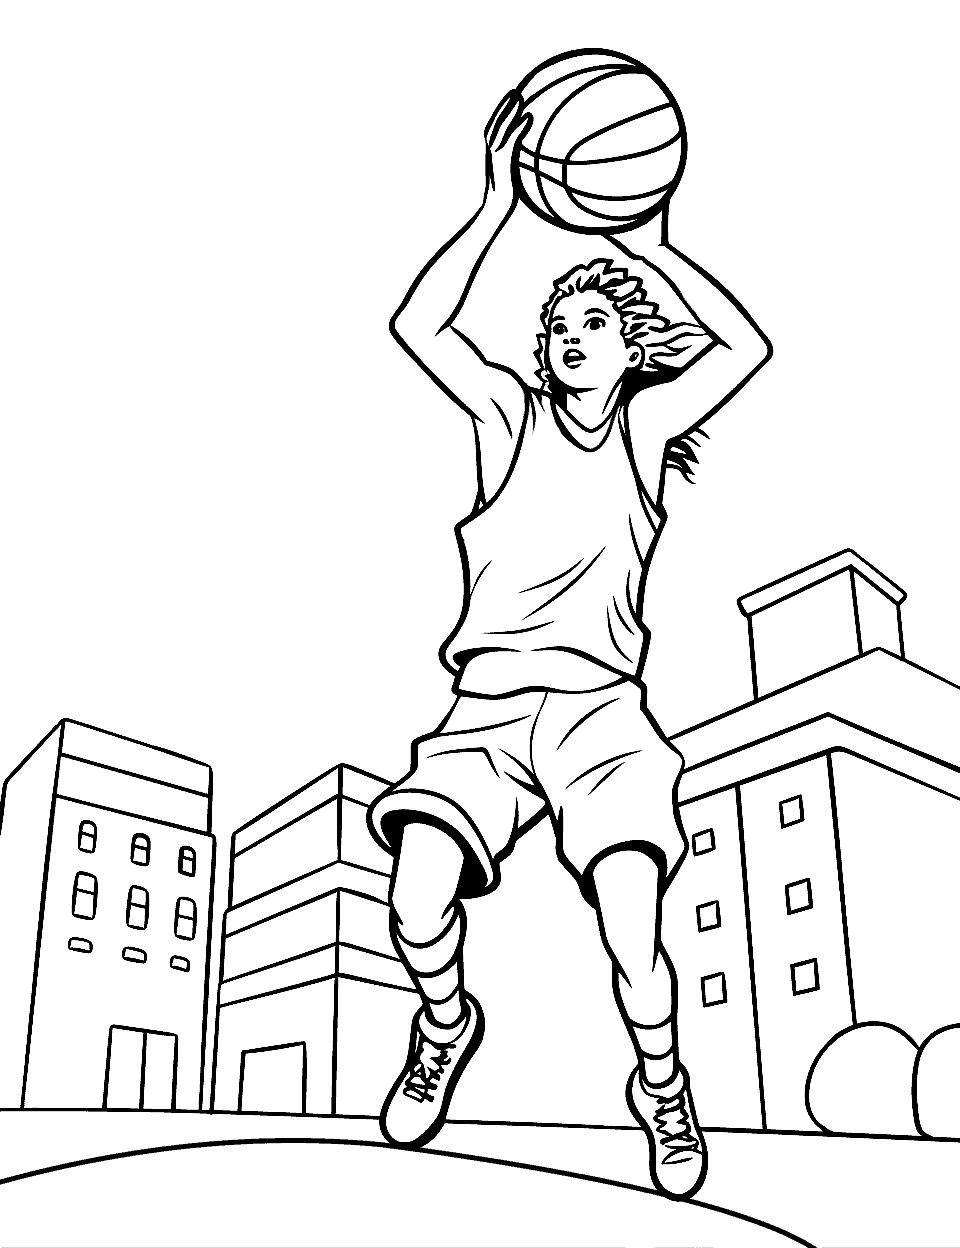 Cool Street Basketball Coloring Page - A teenager playing on an urban basketball court.